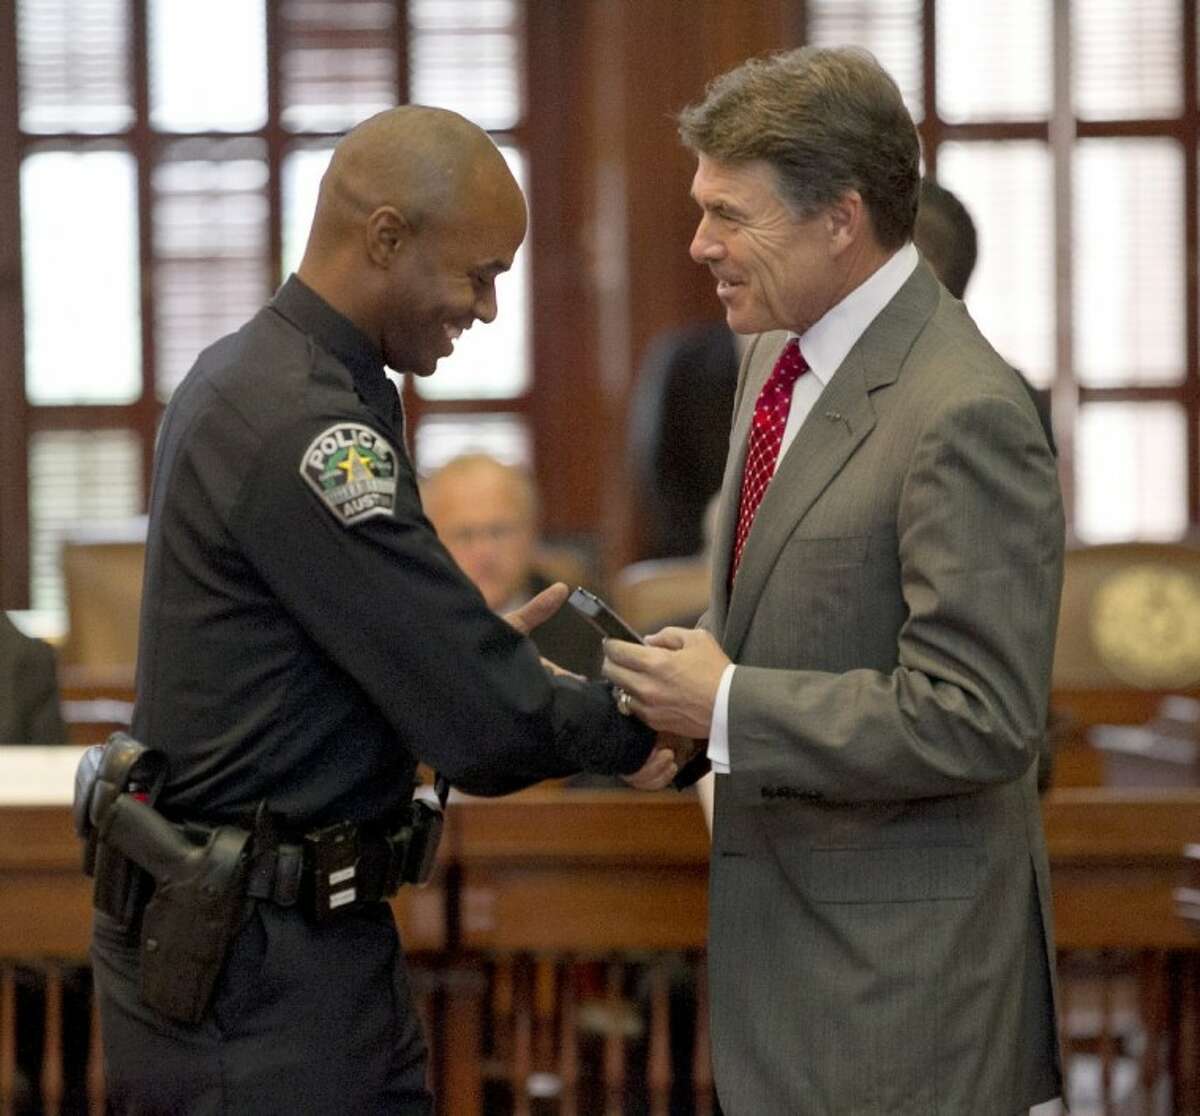 Texas Gov. Rick Perry presents seriously injured Austin Police officer Frank Wilson V with his medal after Perry gave remarks and presented the 2012 Star of Texas Awards, during a ceremony in the House Chambers in Austin on Sept. 14.